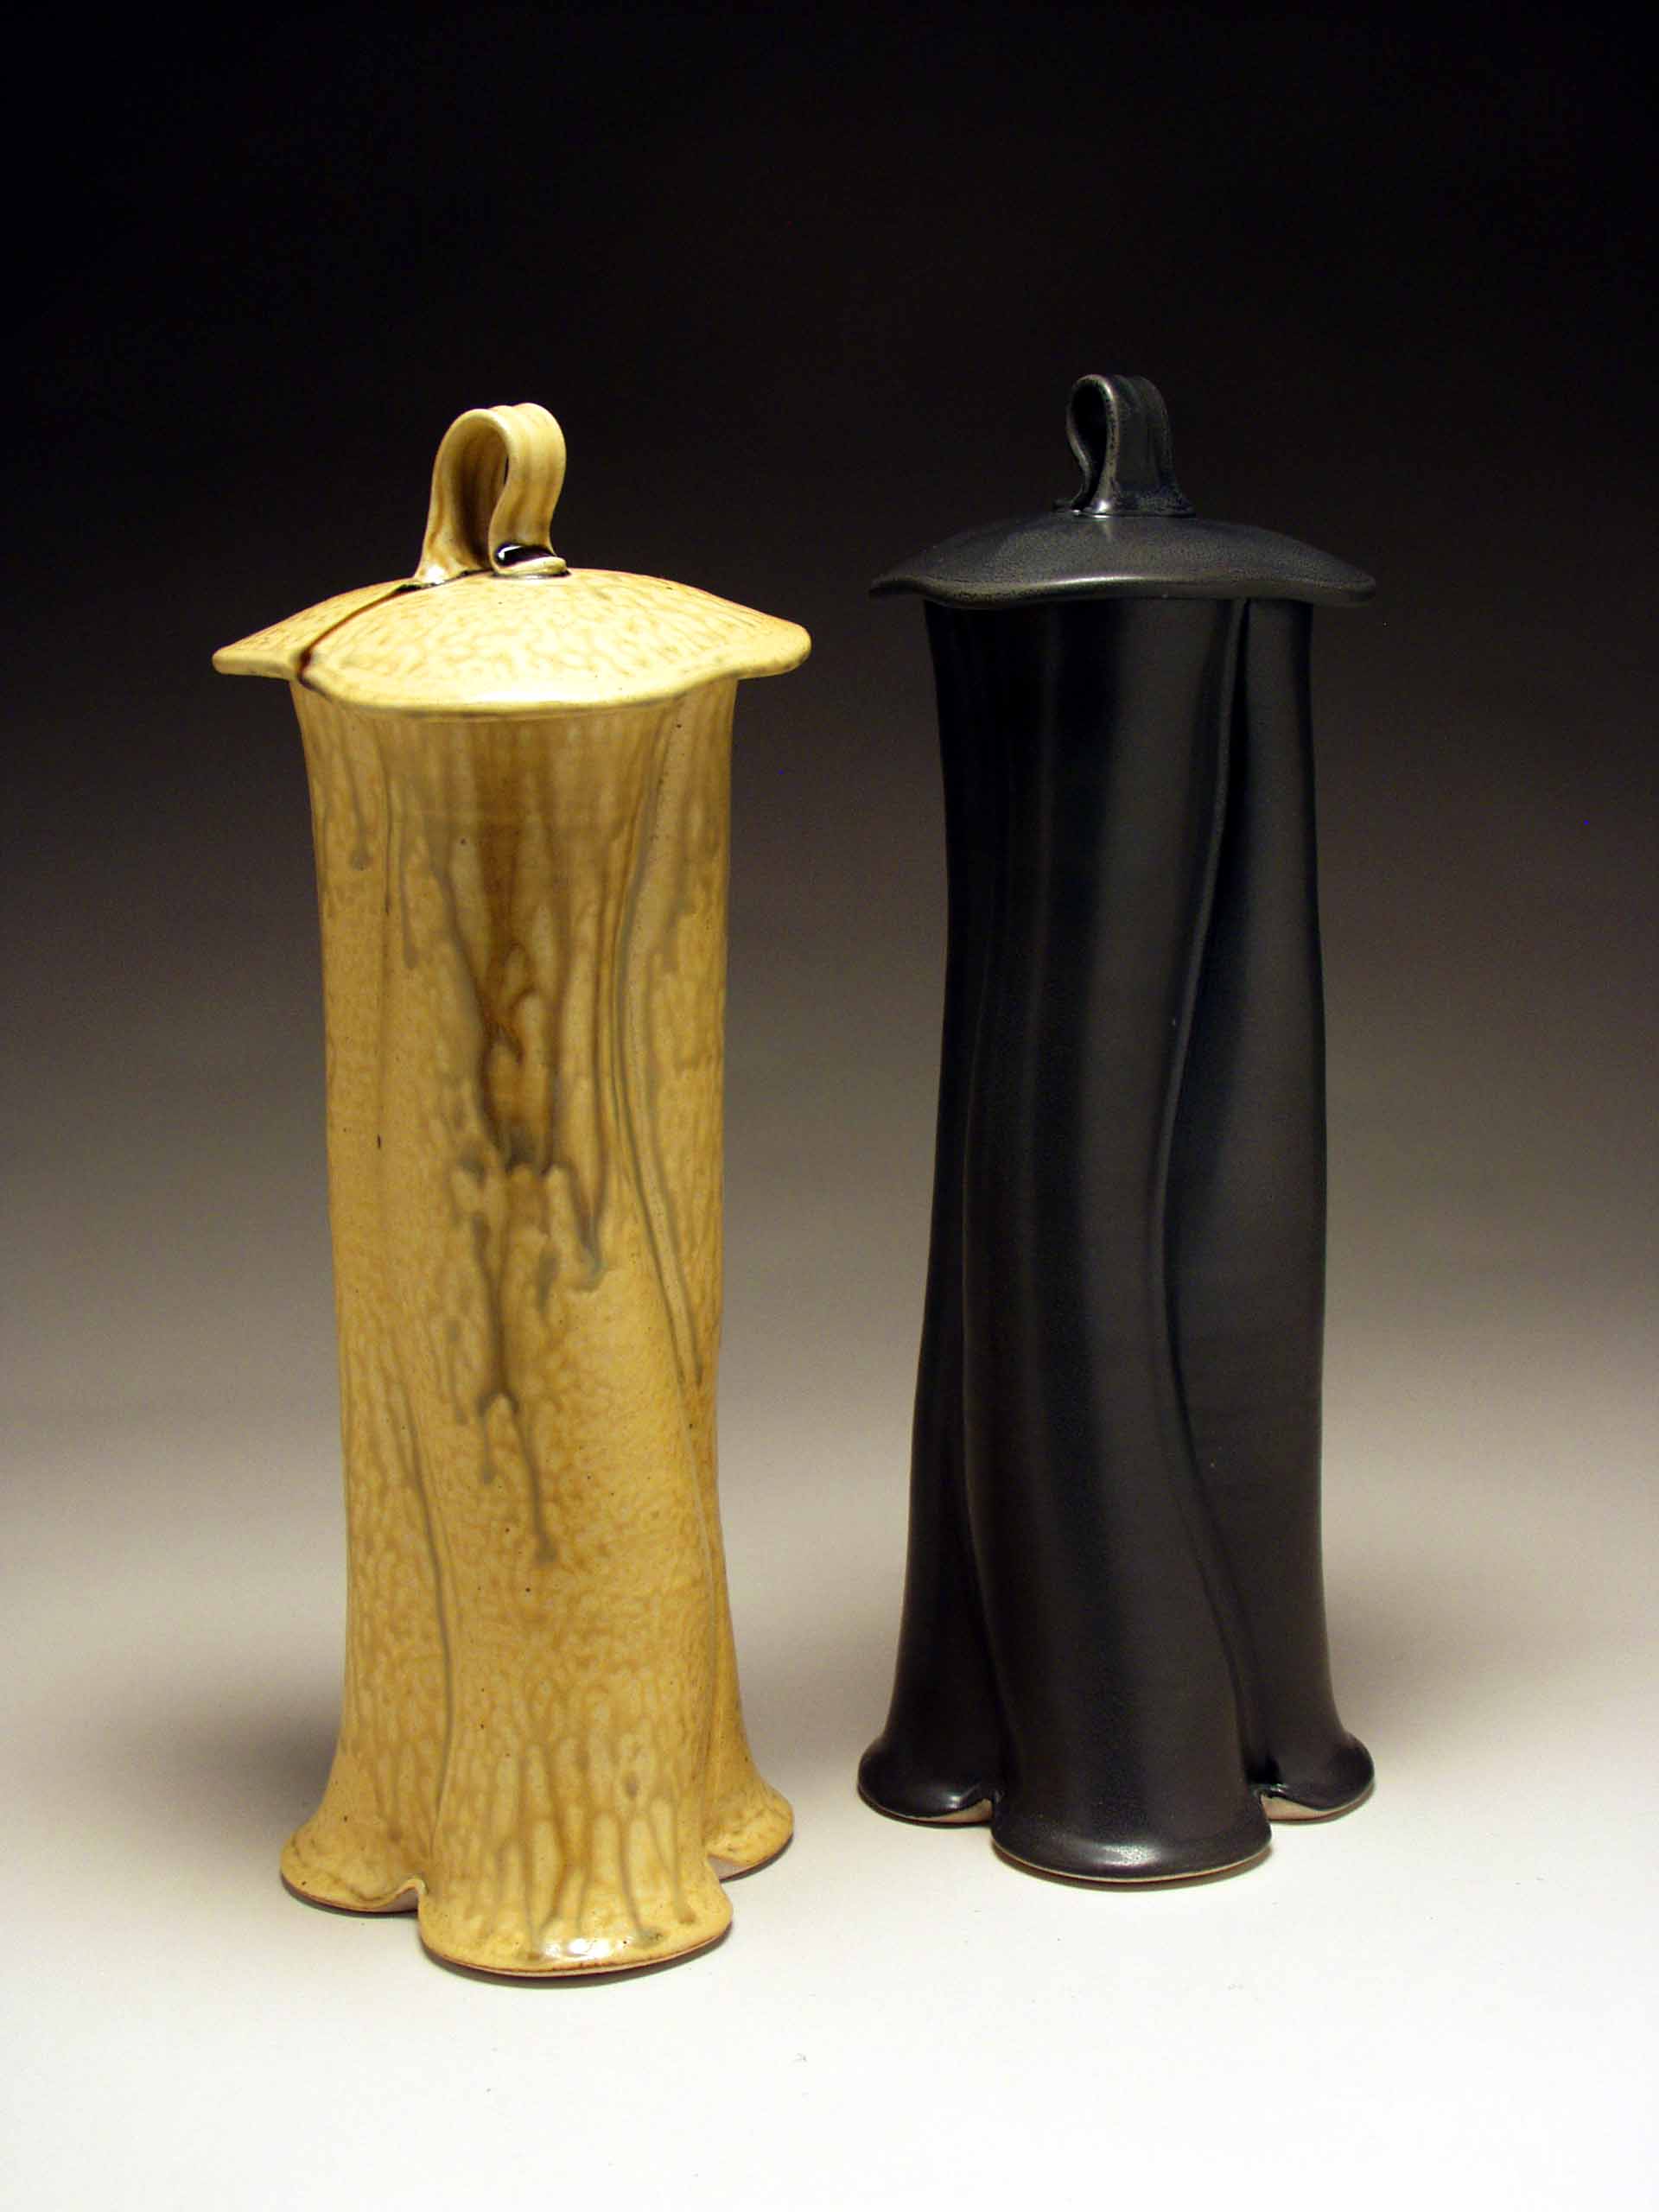 pair of jars by conner burns